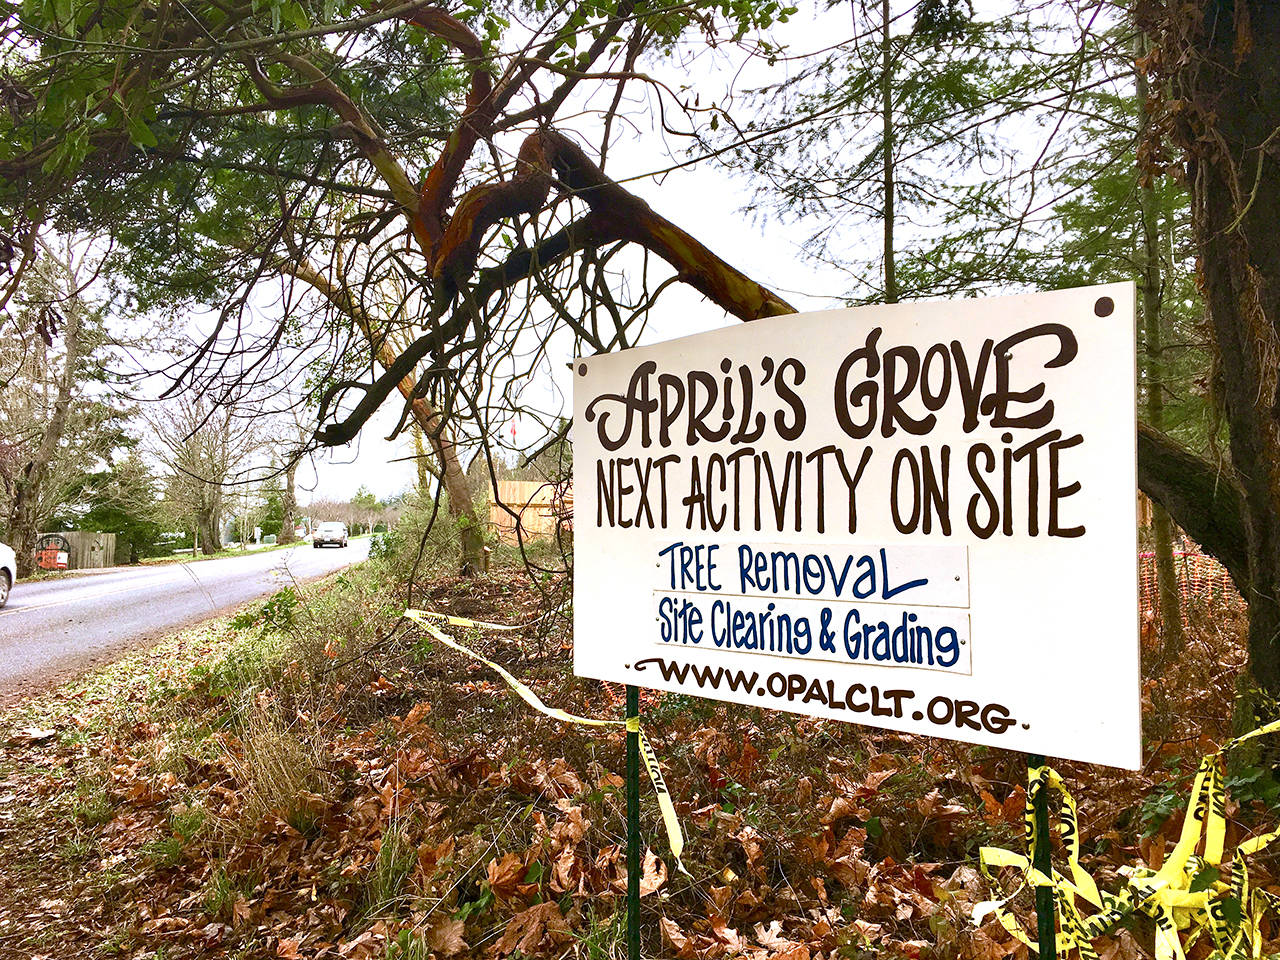 Site work underway: construction bids new hurdle for April’s Grove